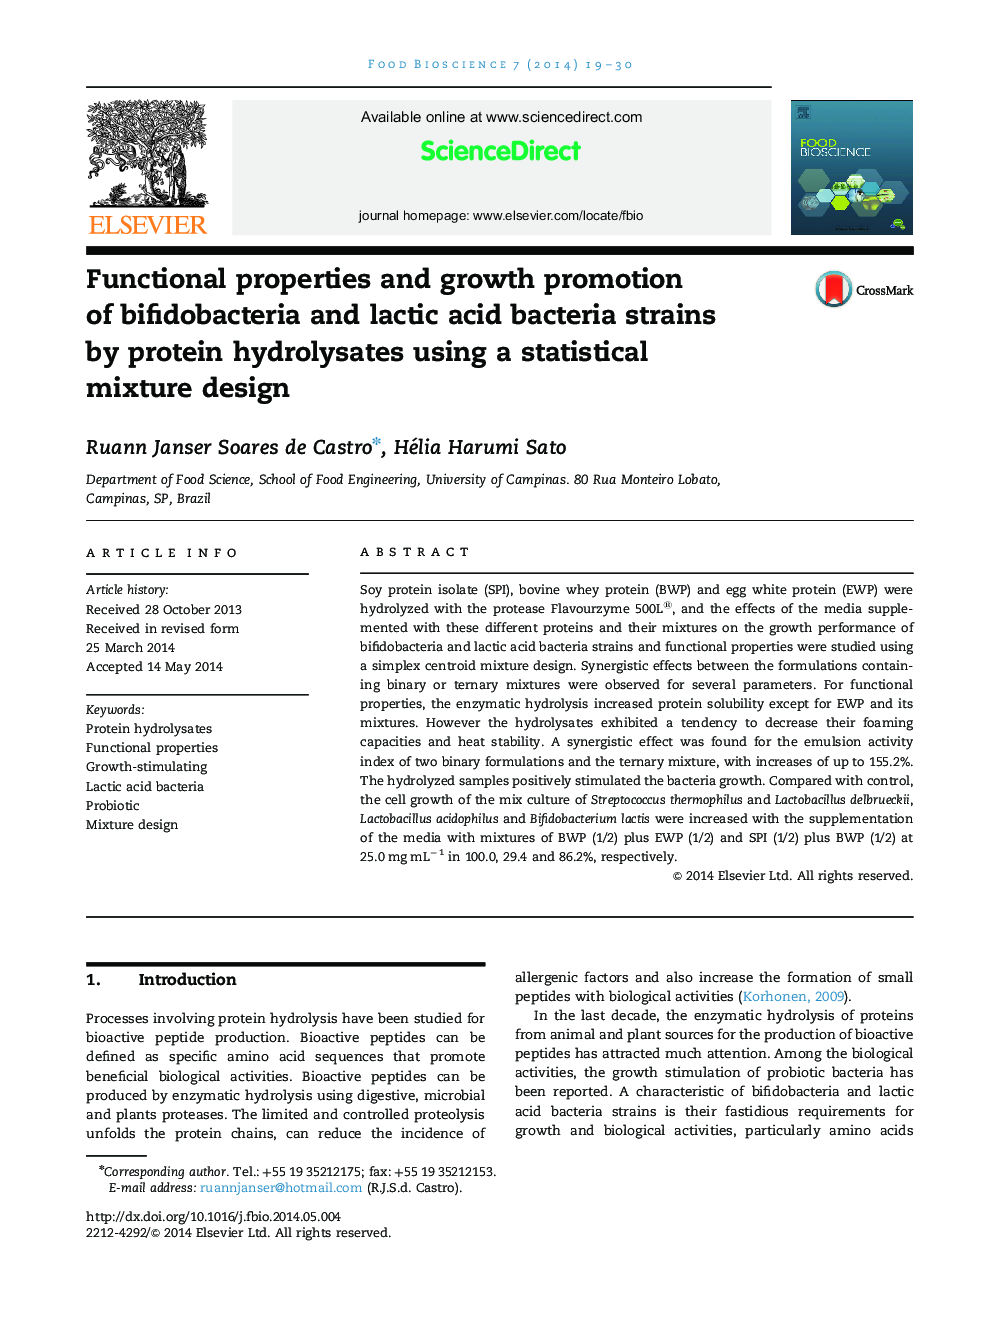 Functional properties and growth promotion of bifidobacteria and lactic acid bacteria strains by protein hydrolysates using a statistical mixture design